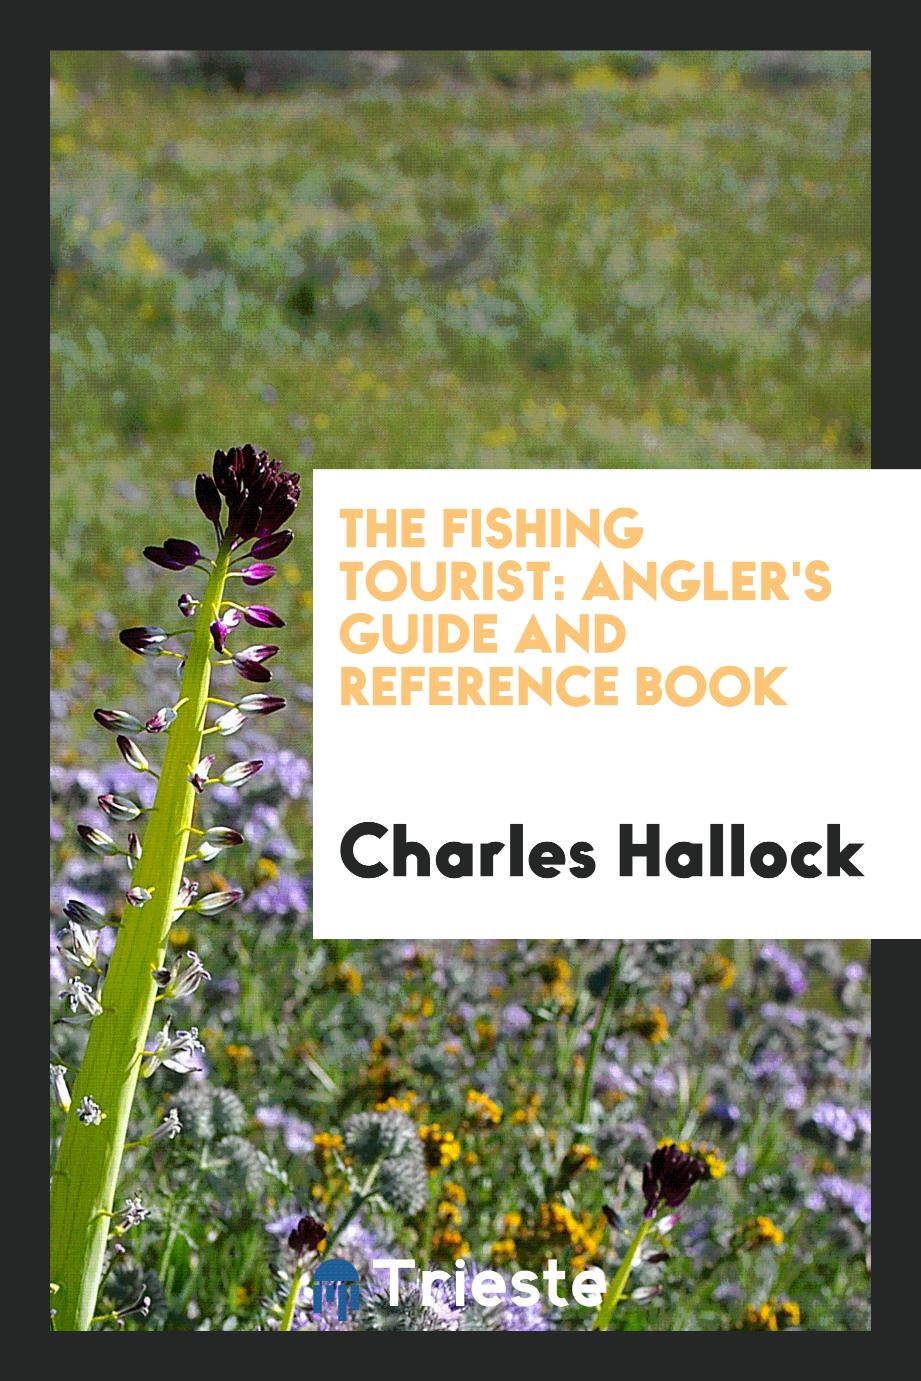 The fishing tourist: Angler's guide and reference book